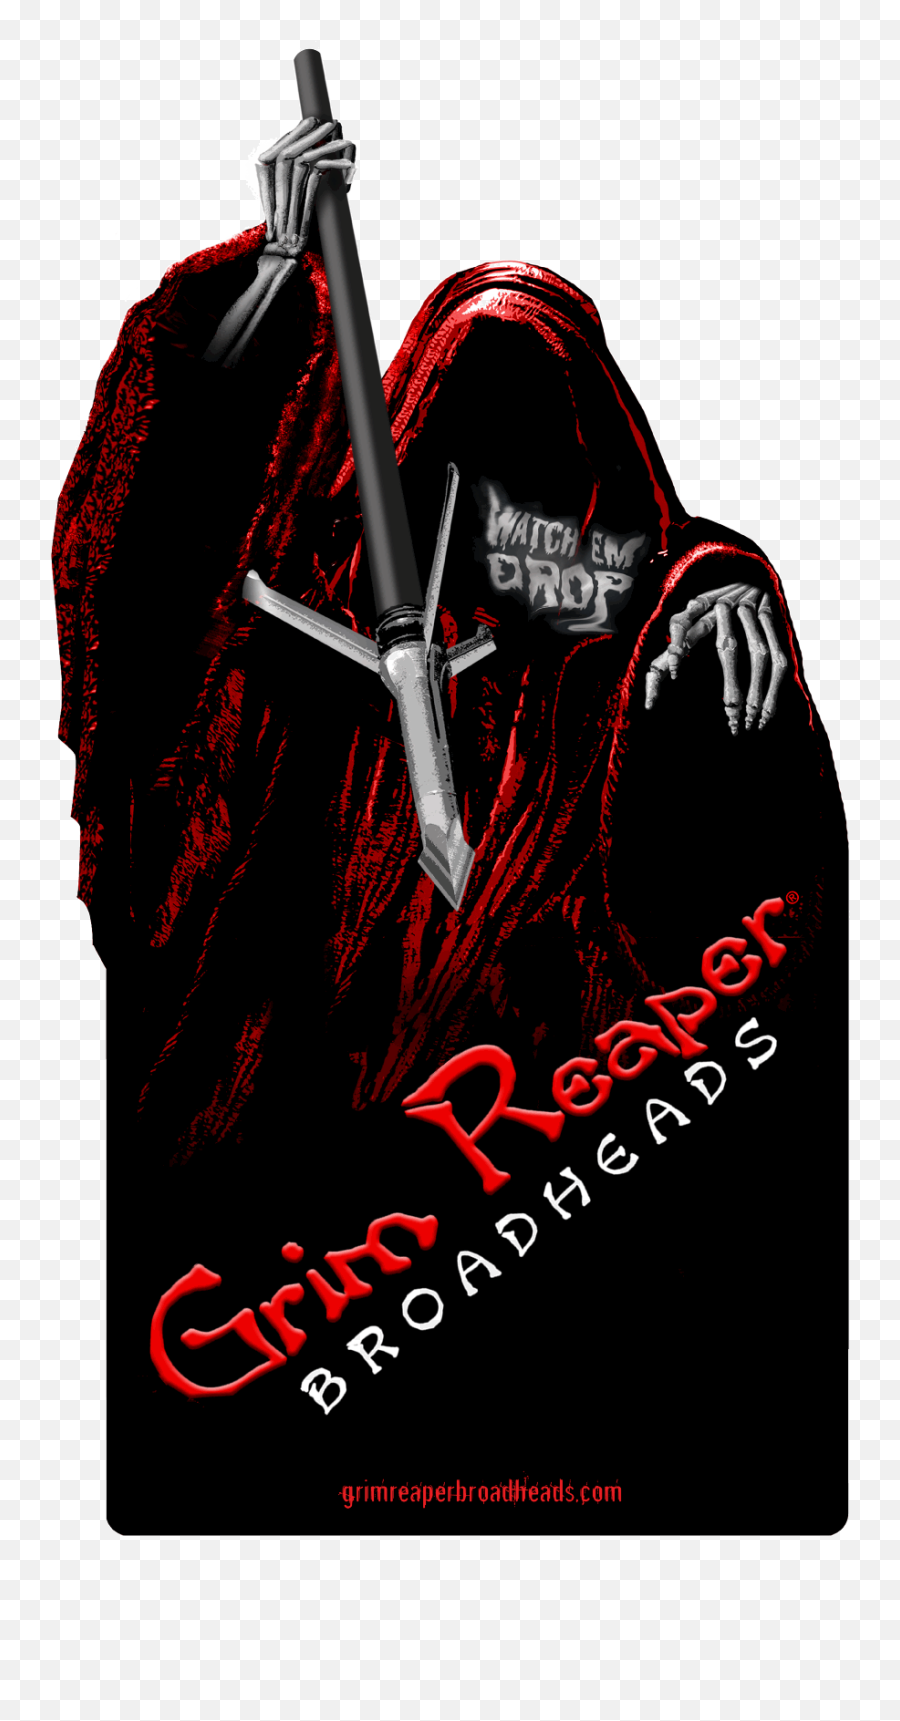 Bowhunting 101 Grim Reaper Broadheads And Gold Tip Arrows - Grim Reaper Broadheads Logo Emoji,Grim Reaper Logo